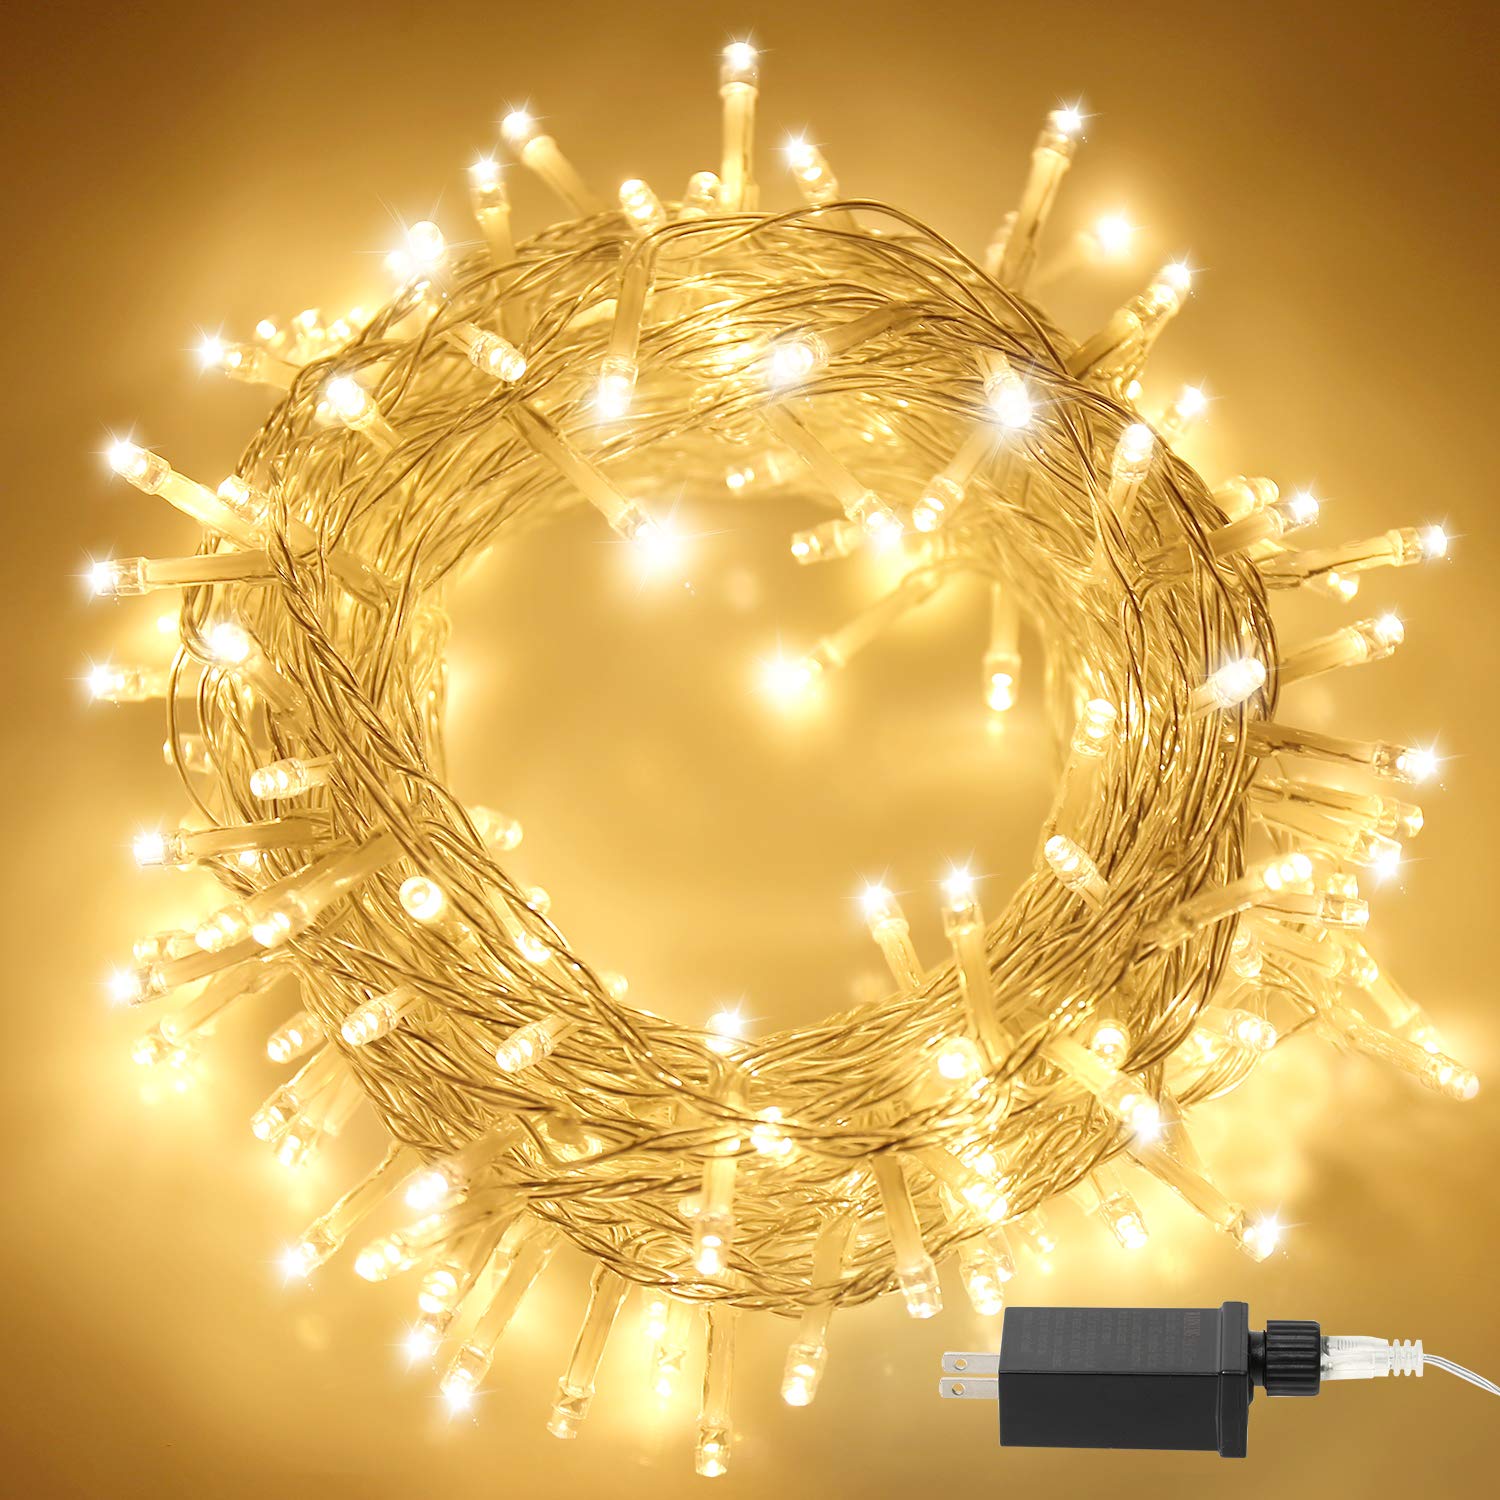 6M 50 LED Globe String Lights with Remote USB or for Zorela Globe Fairy Lights 